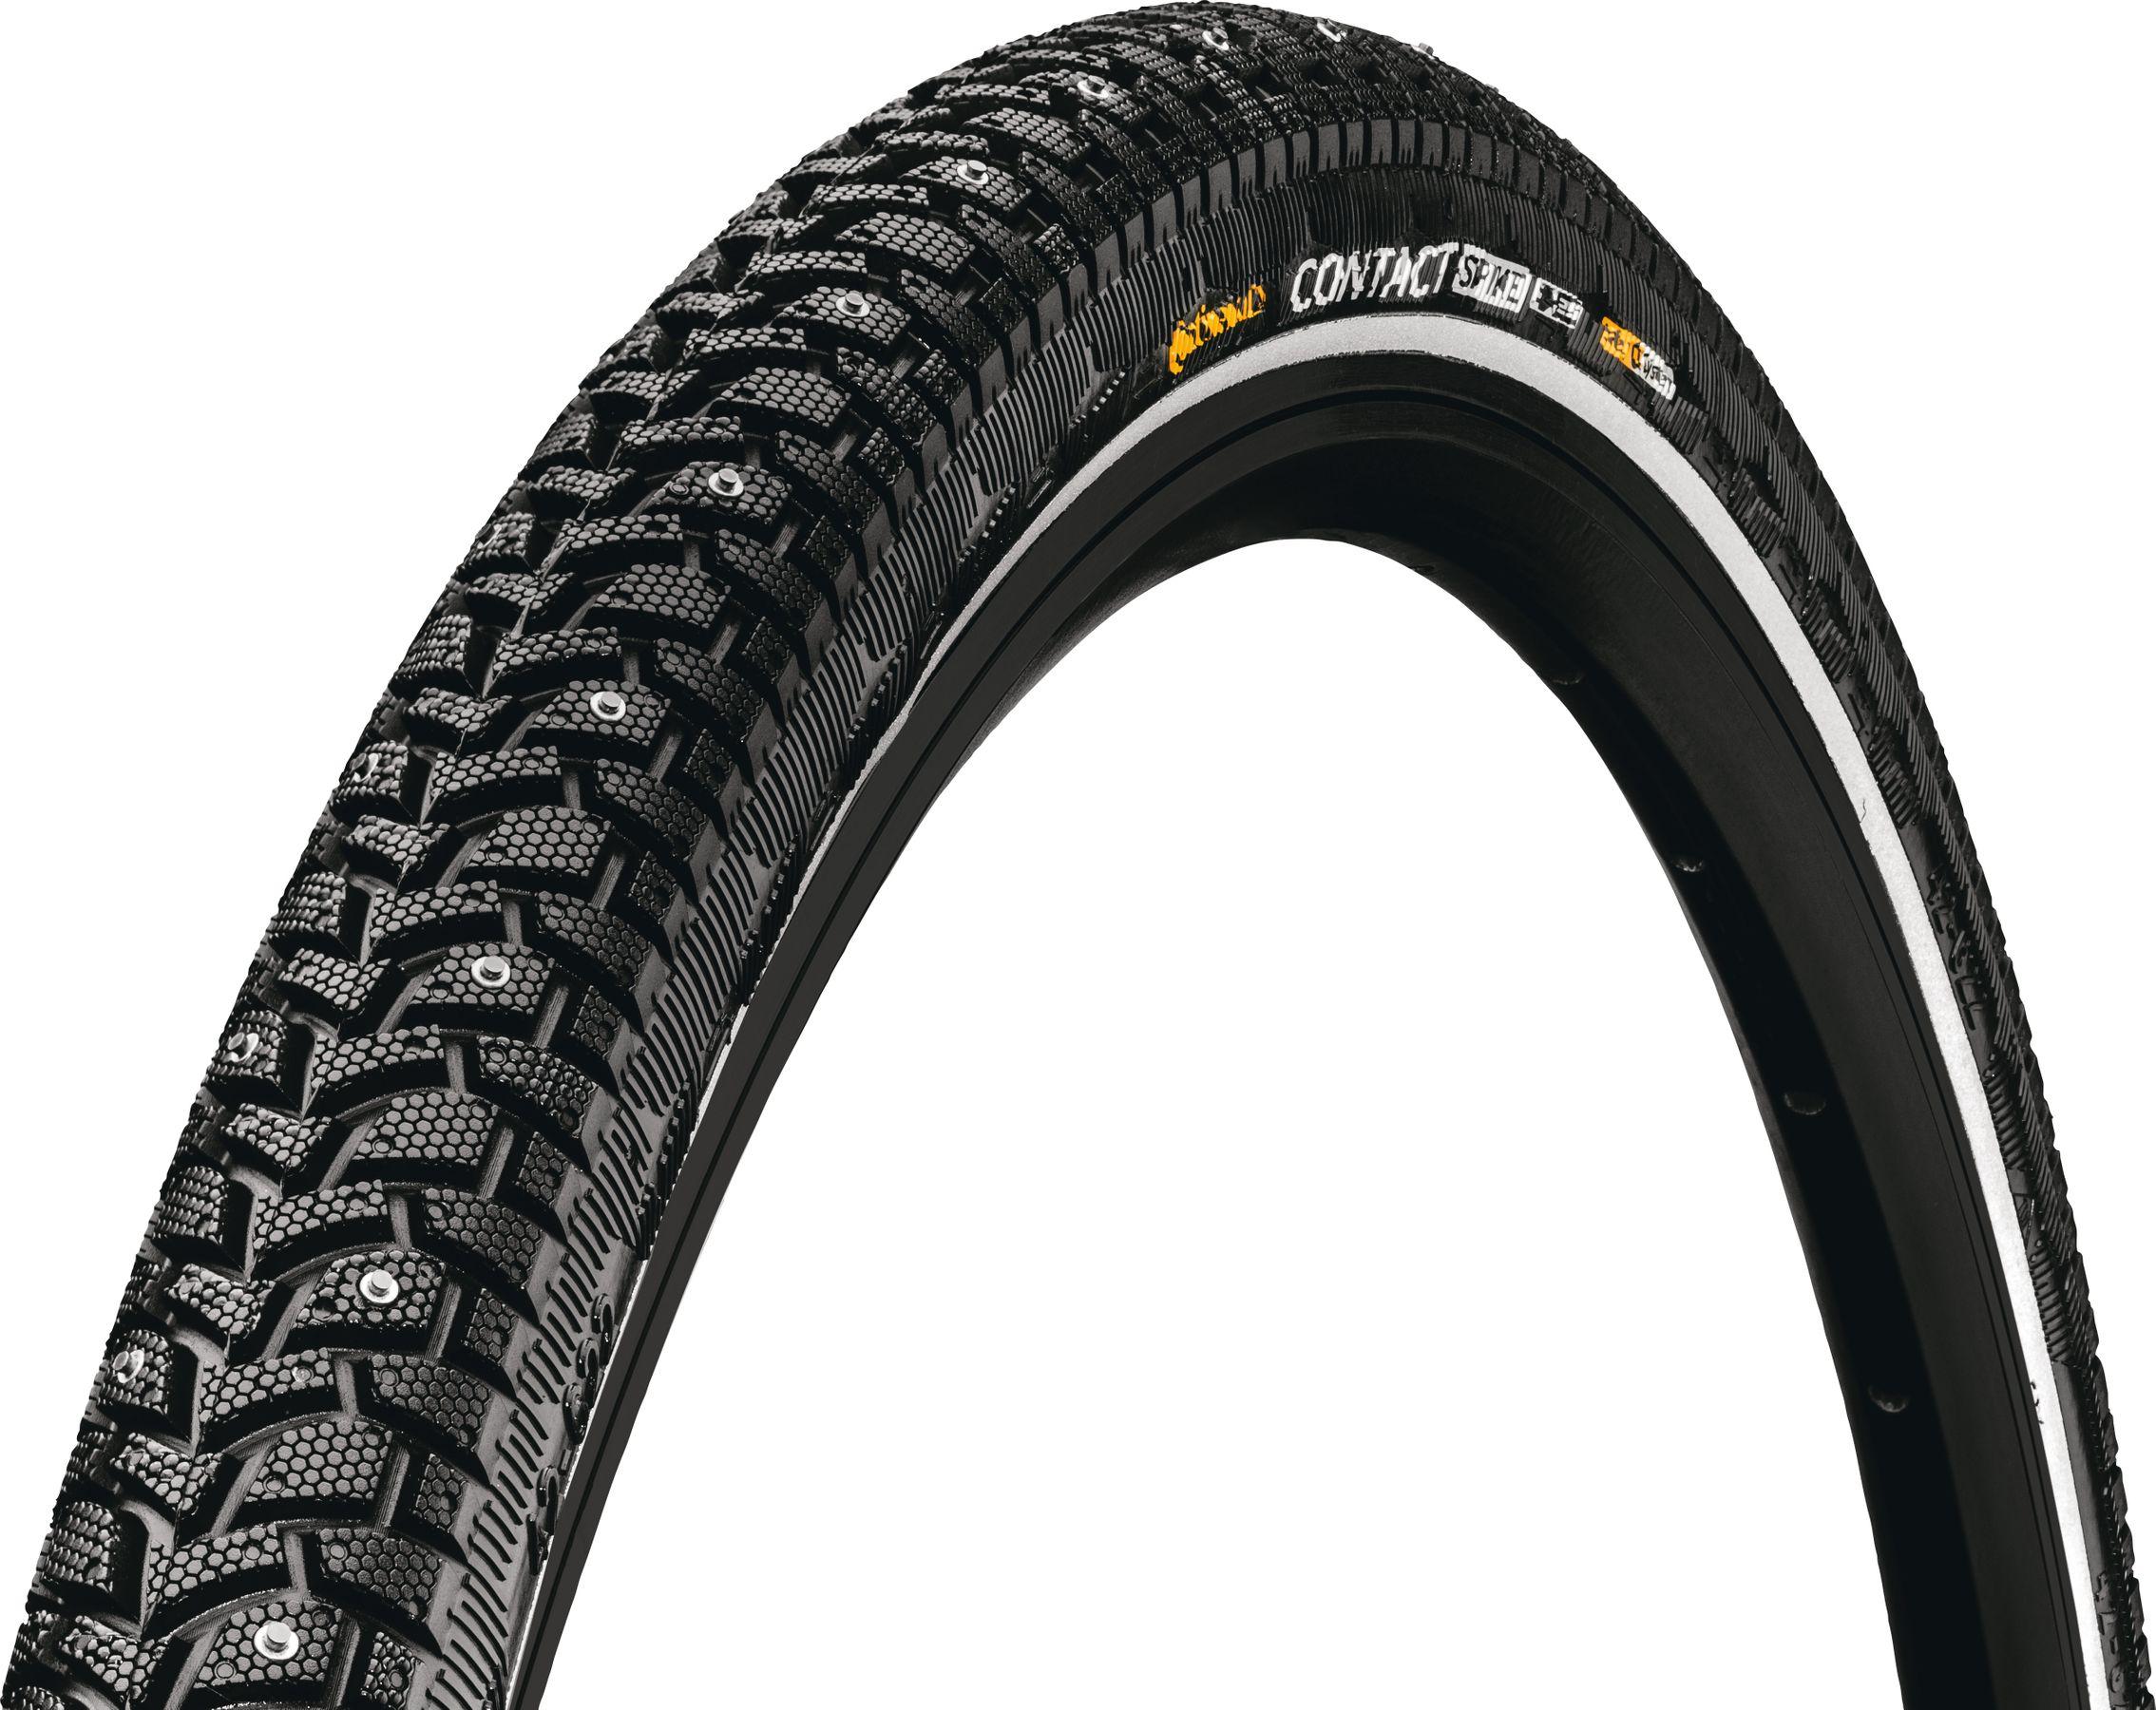 Continental Contact Spike 120 Wire Bead Tyre - Black/reflex